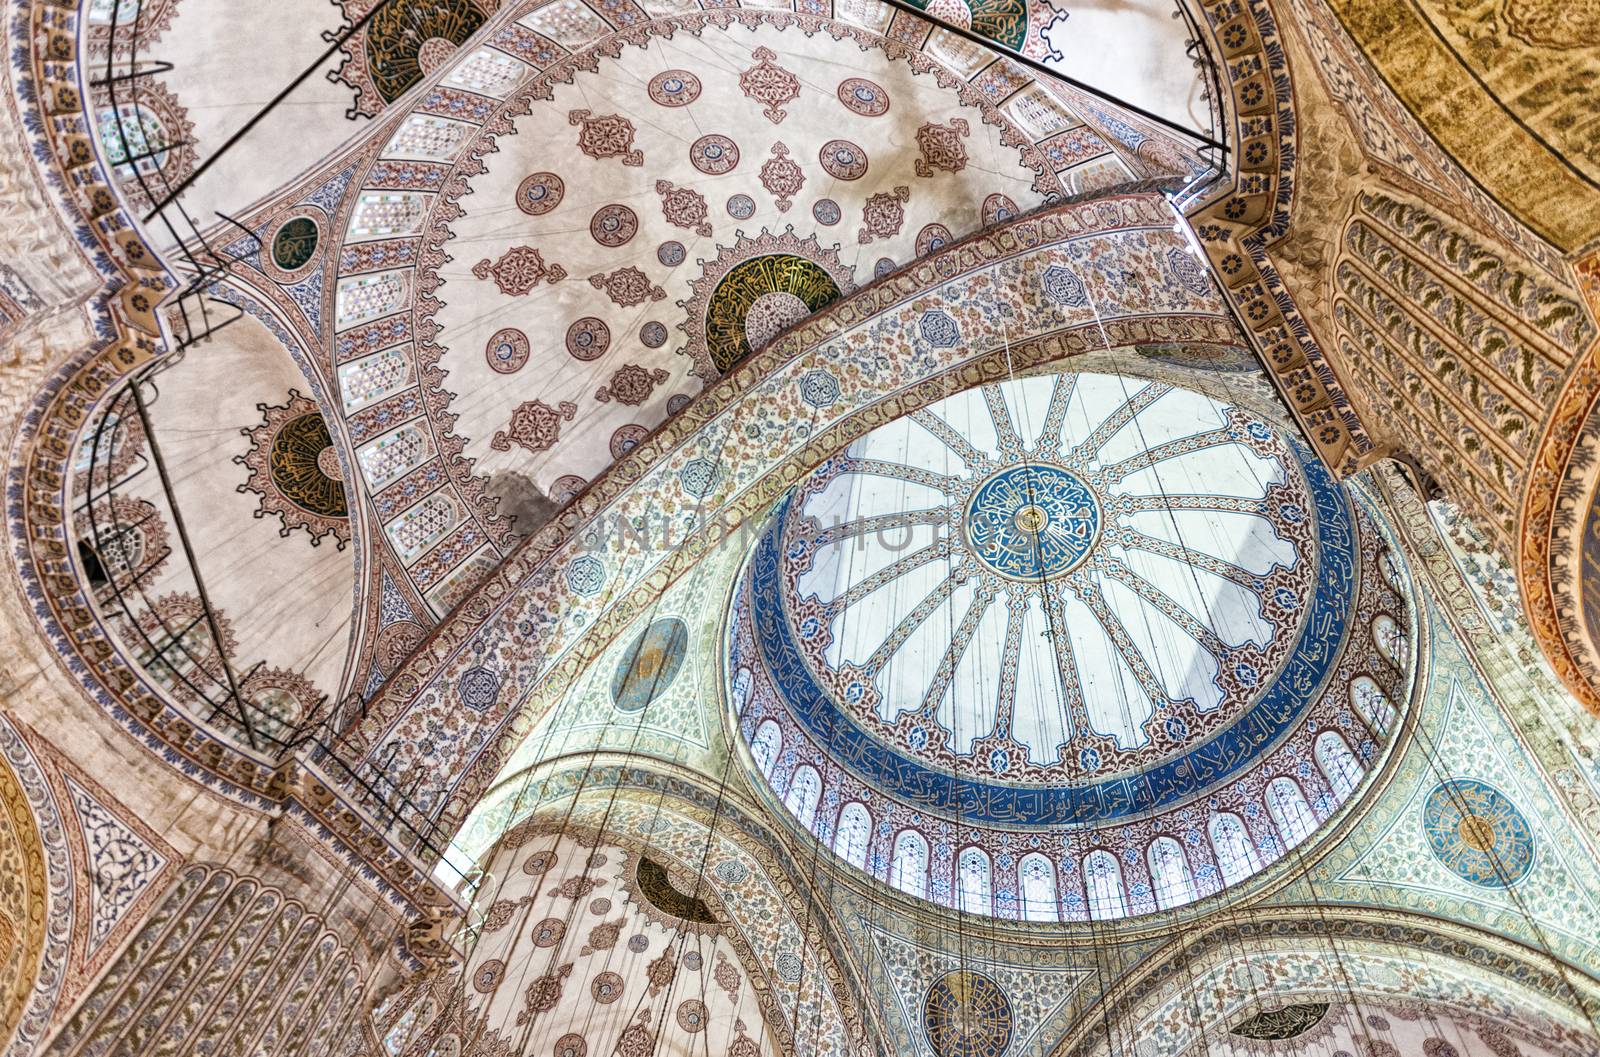 ISTANBUL - SEPTEMBER 20, 2014: Interior of Blue Mosque. The Mosque is the most visited landmark of Istanbul.